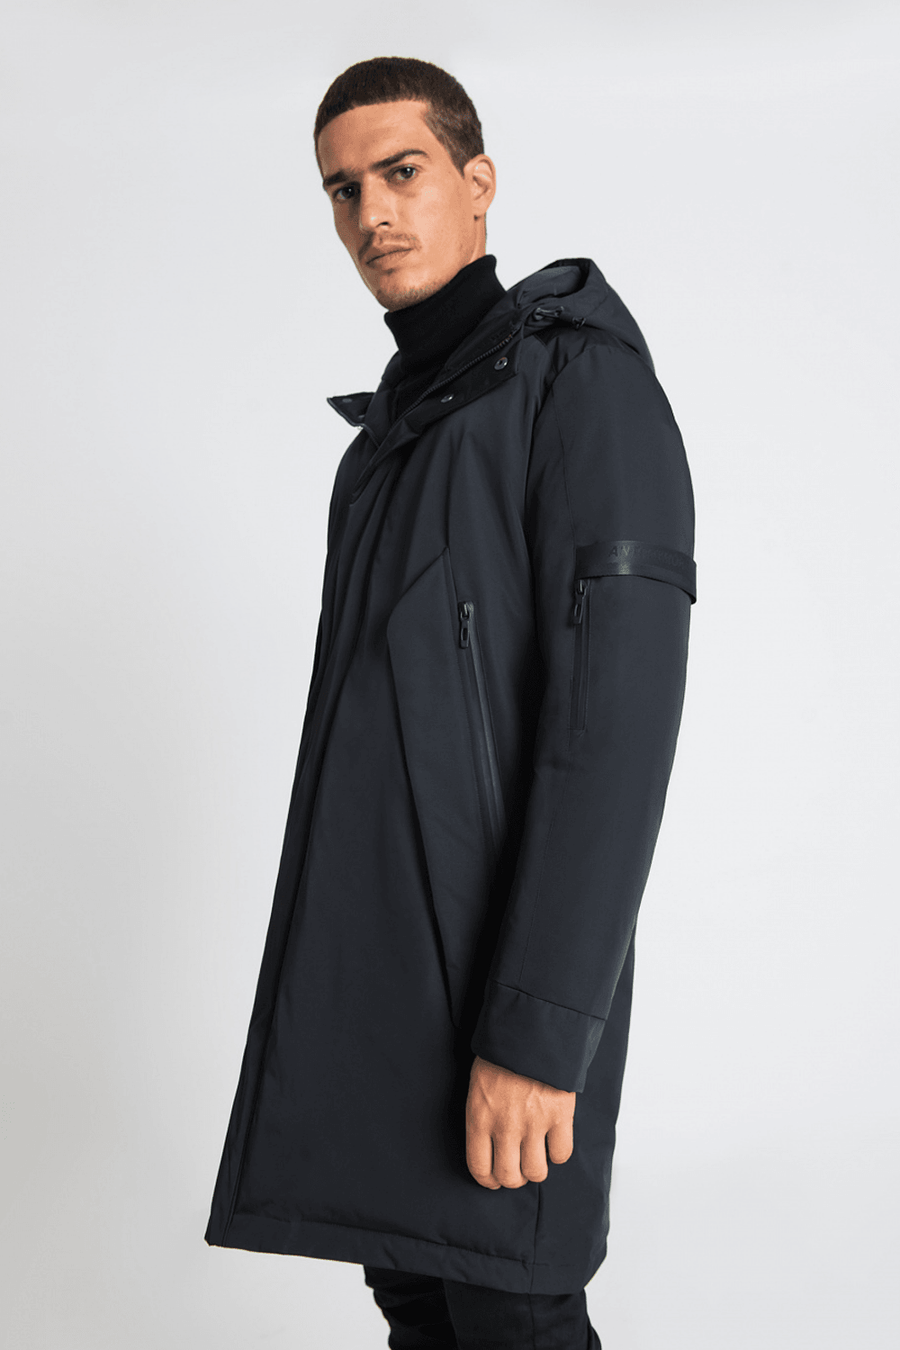 Buy the Antony Morato Long Hooded Panel Jacket in Black at Intro. Spend £50 for free UK delivery. Official stockists. We ship worldwide.